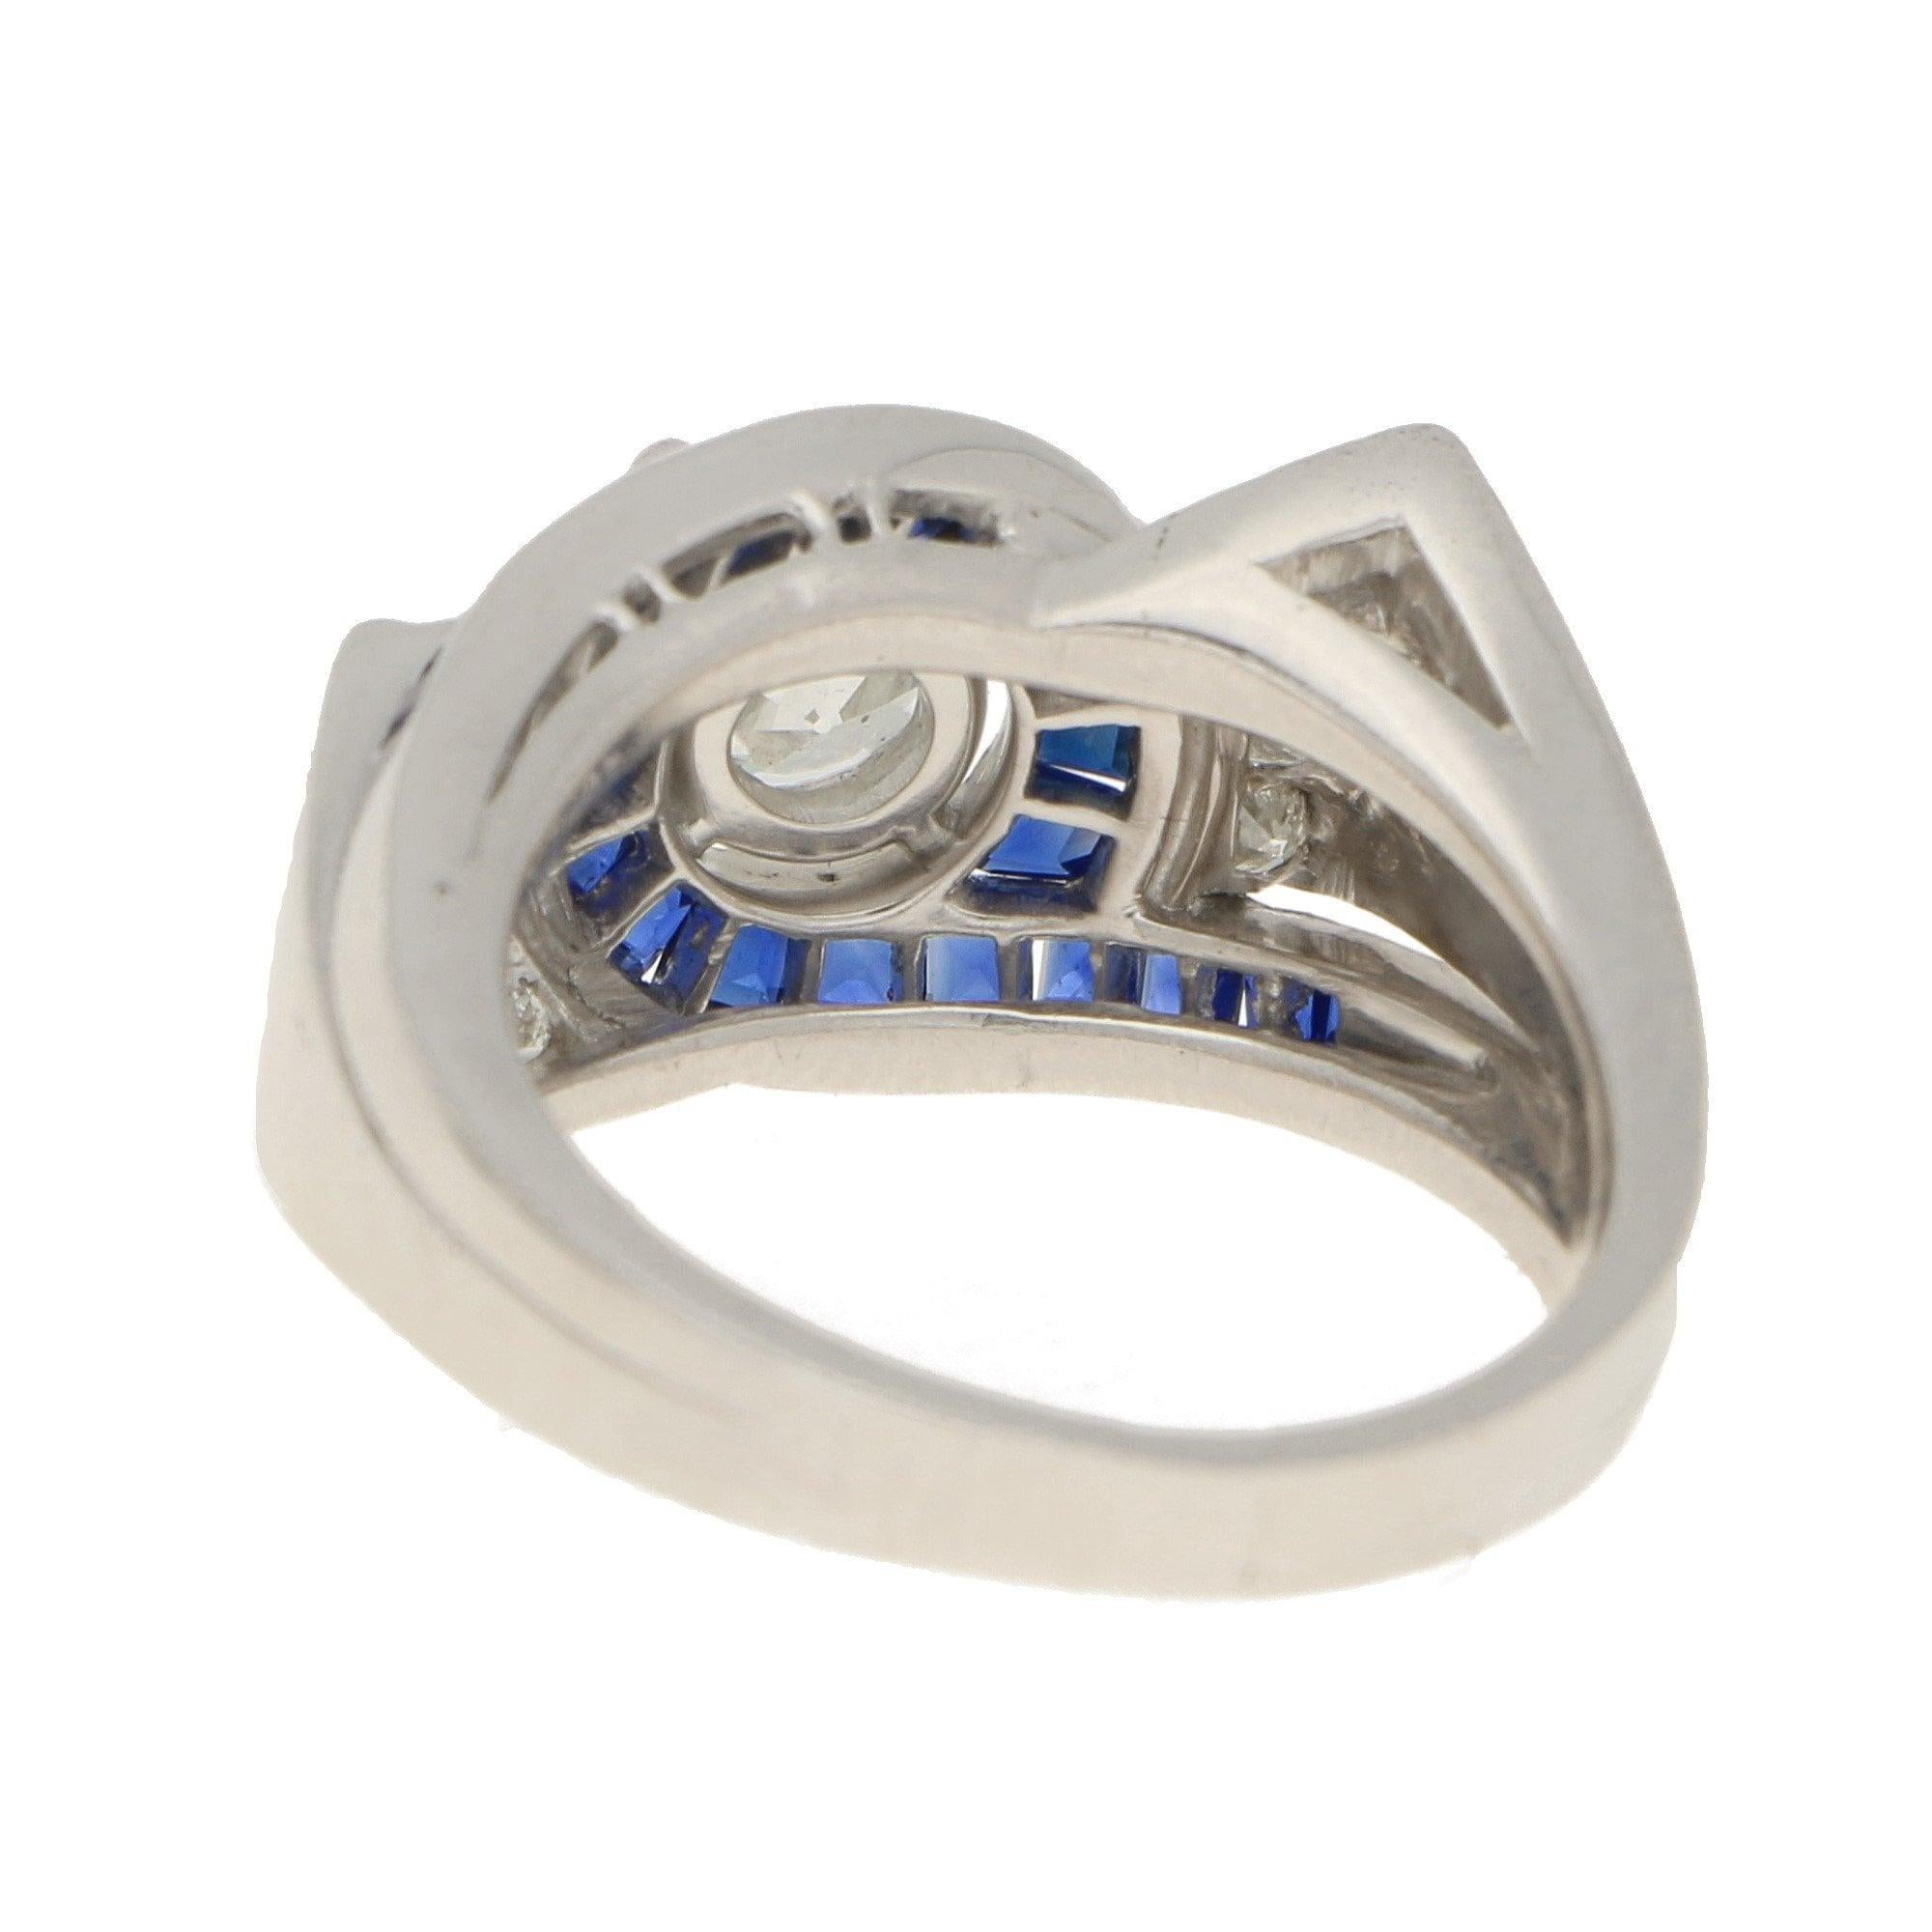 Round Cut Oscar Heyman Art Deco Style Diamond and Sapphire Engagement Ring Set in Platinum For Sale